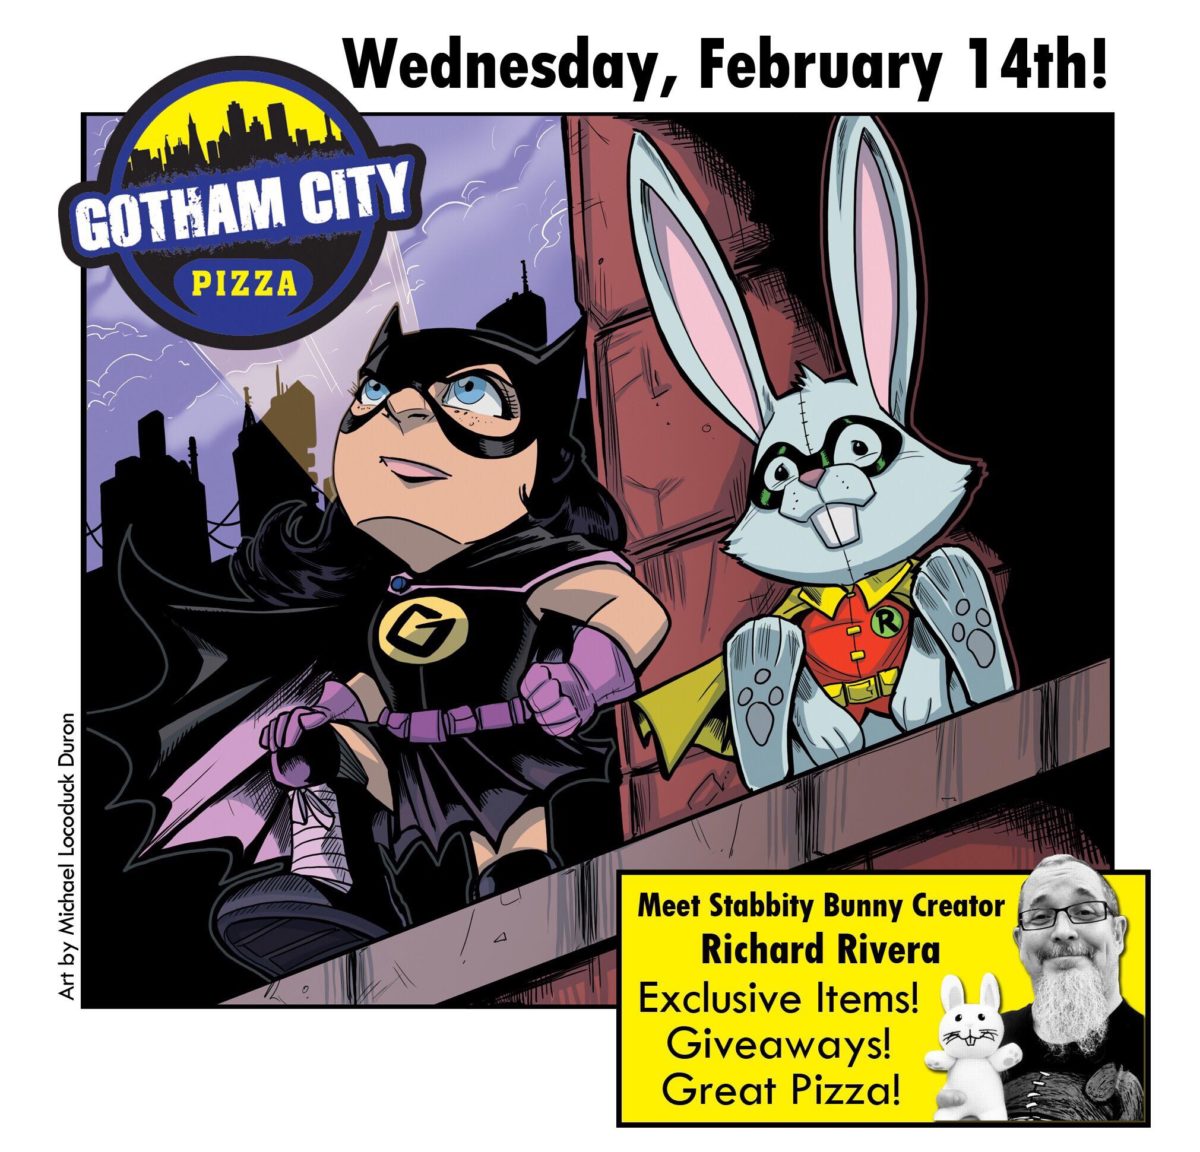 Valentine’s Day at Gotham City PIZZA:: Celebrate your Love of Pizza and Comics with the STABBITY BUNNY Creator RICHARD RIVIERA